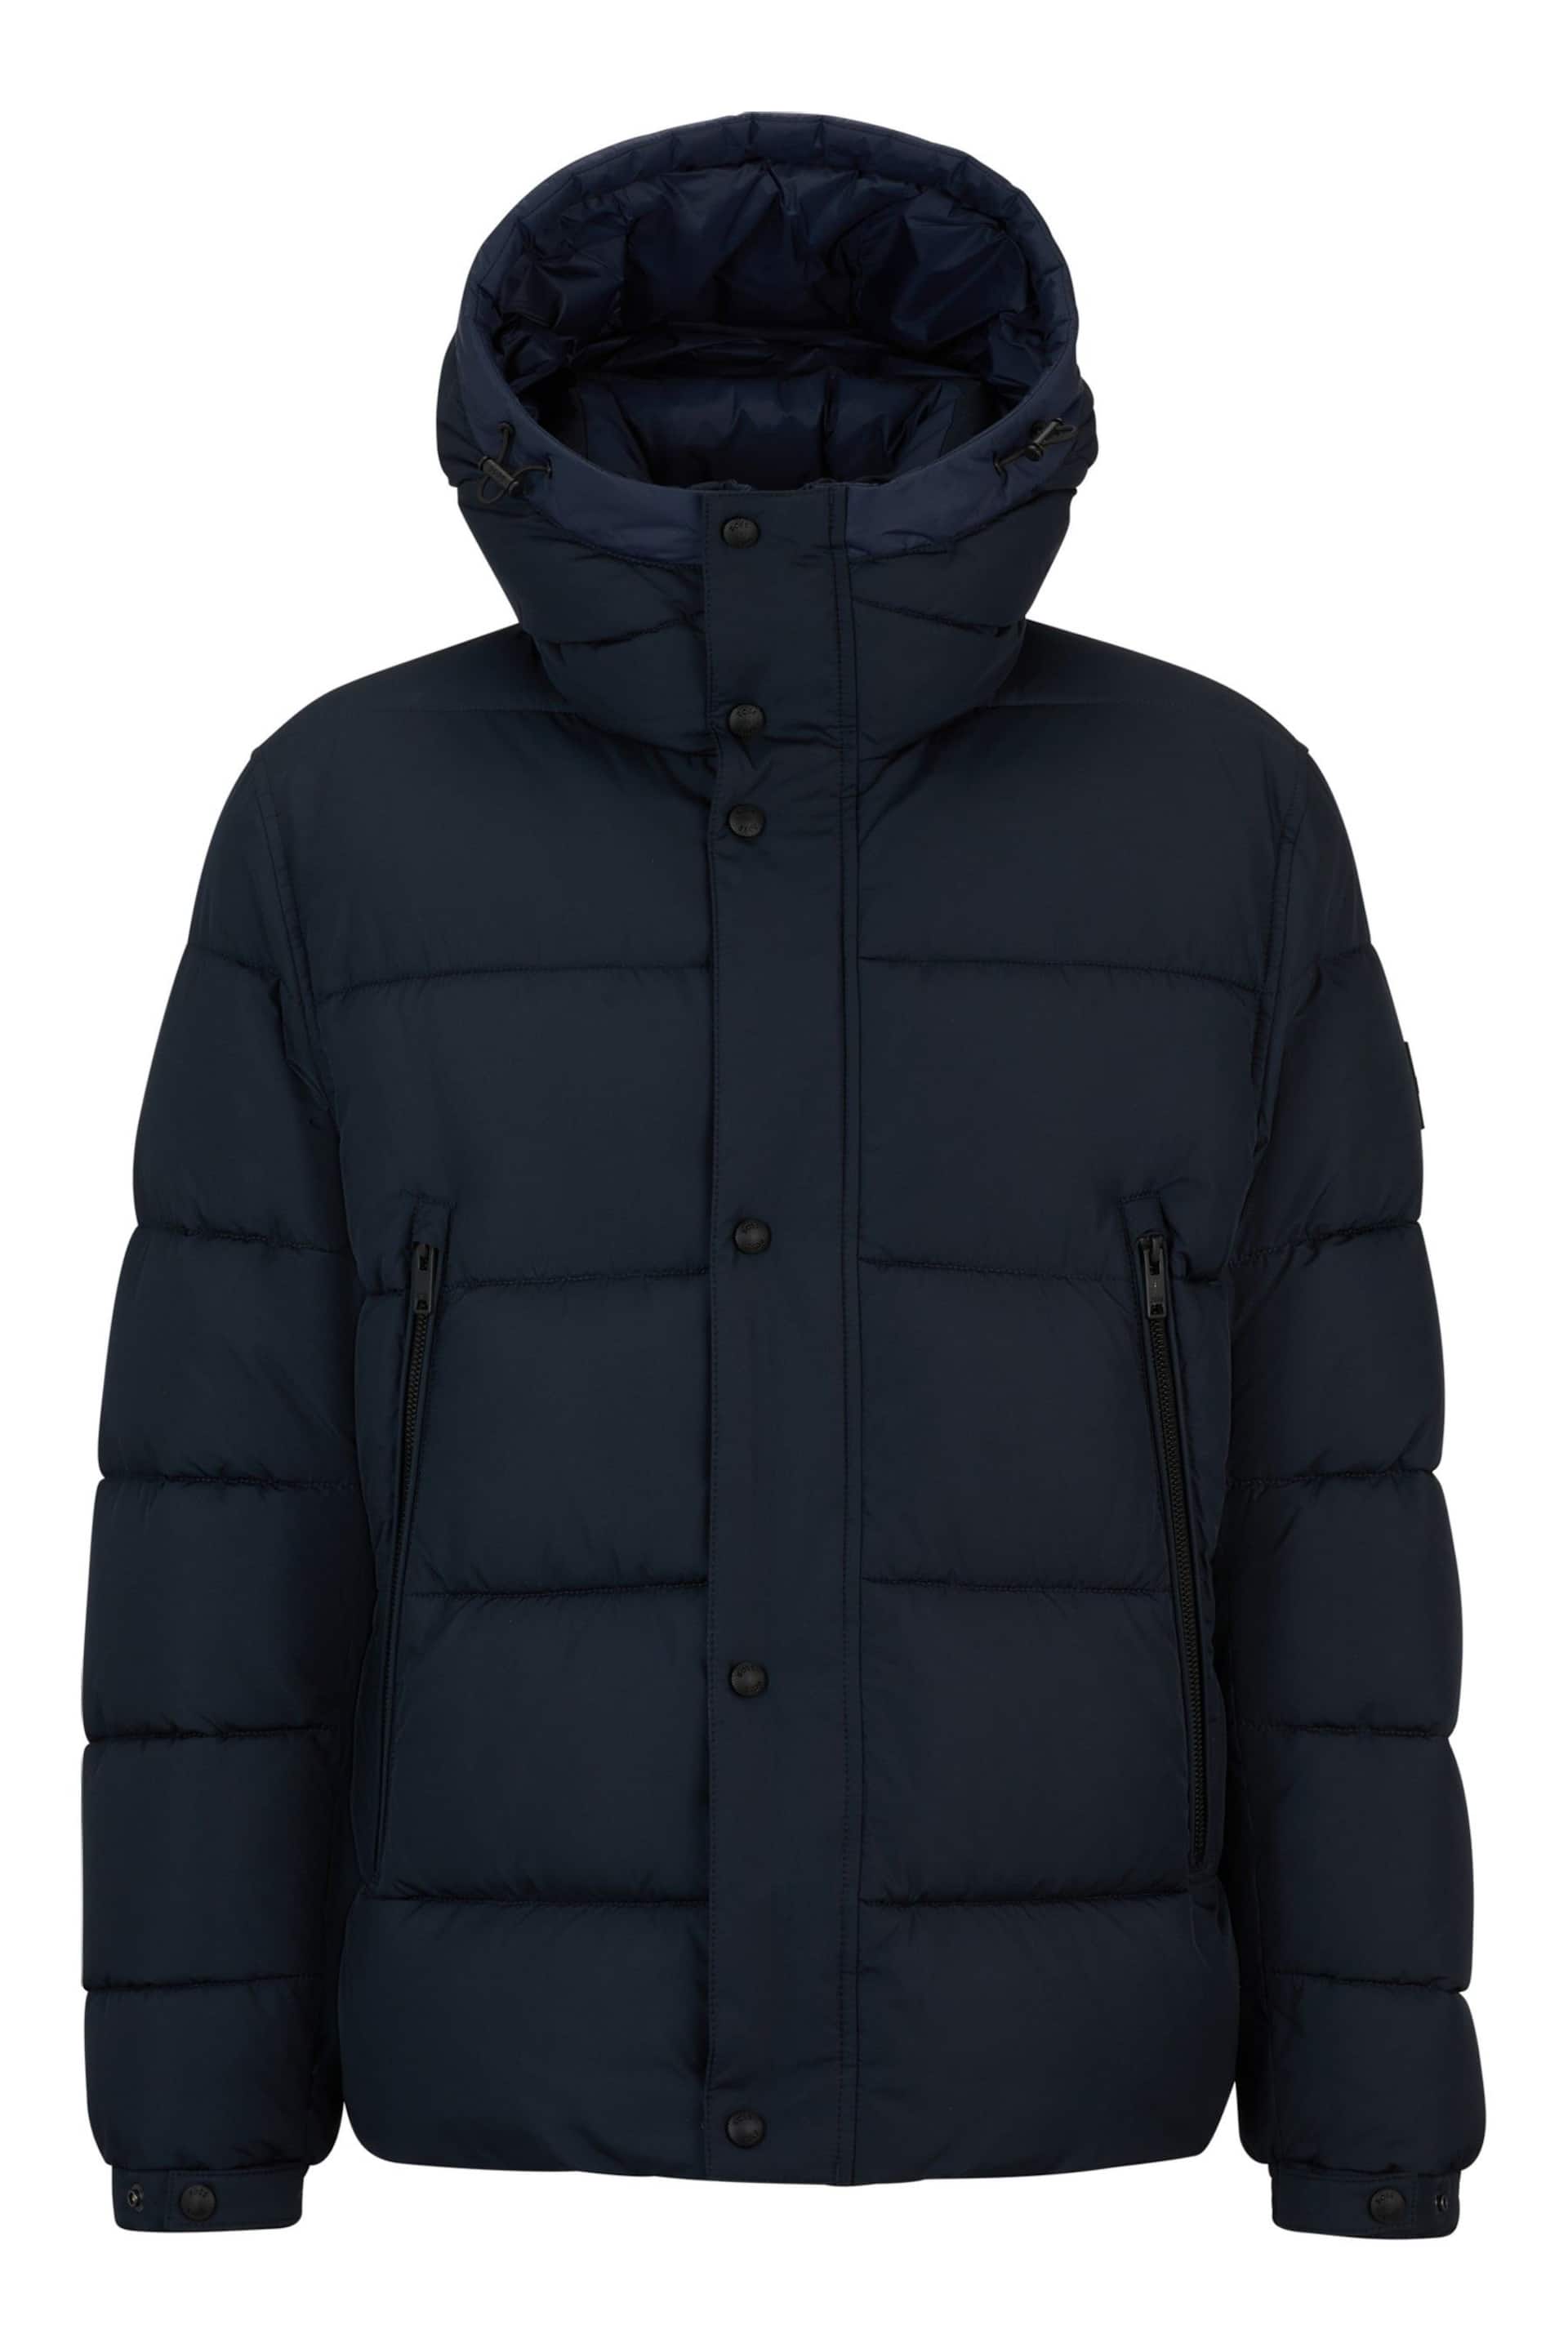 BOSS Blue Water Repellent Hooded Down Puffer Jacket - Image 6 of 6